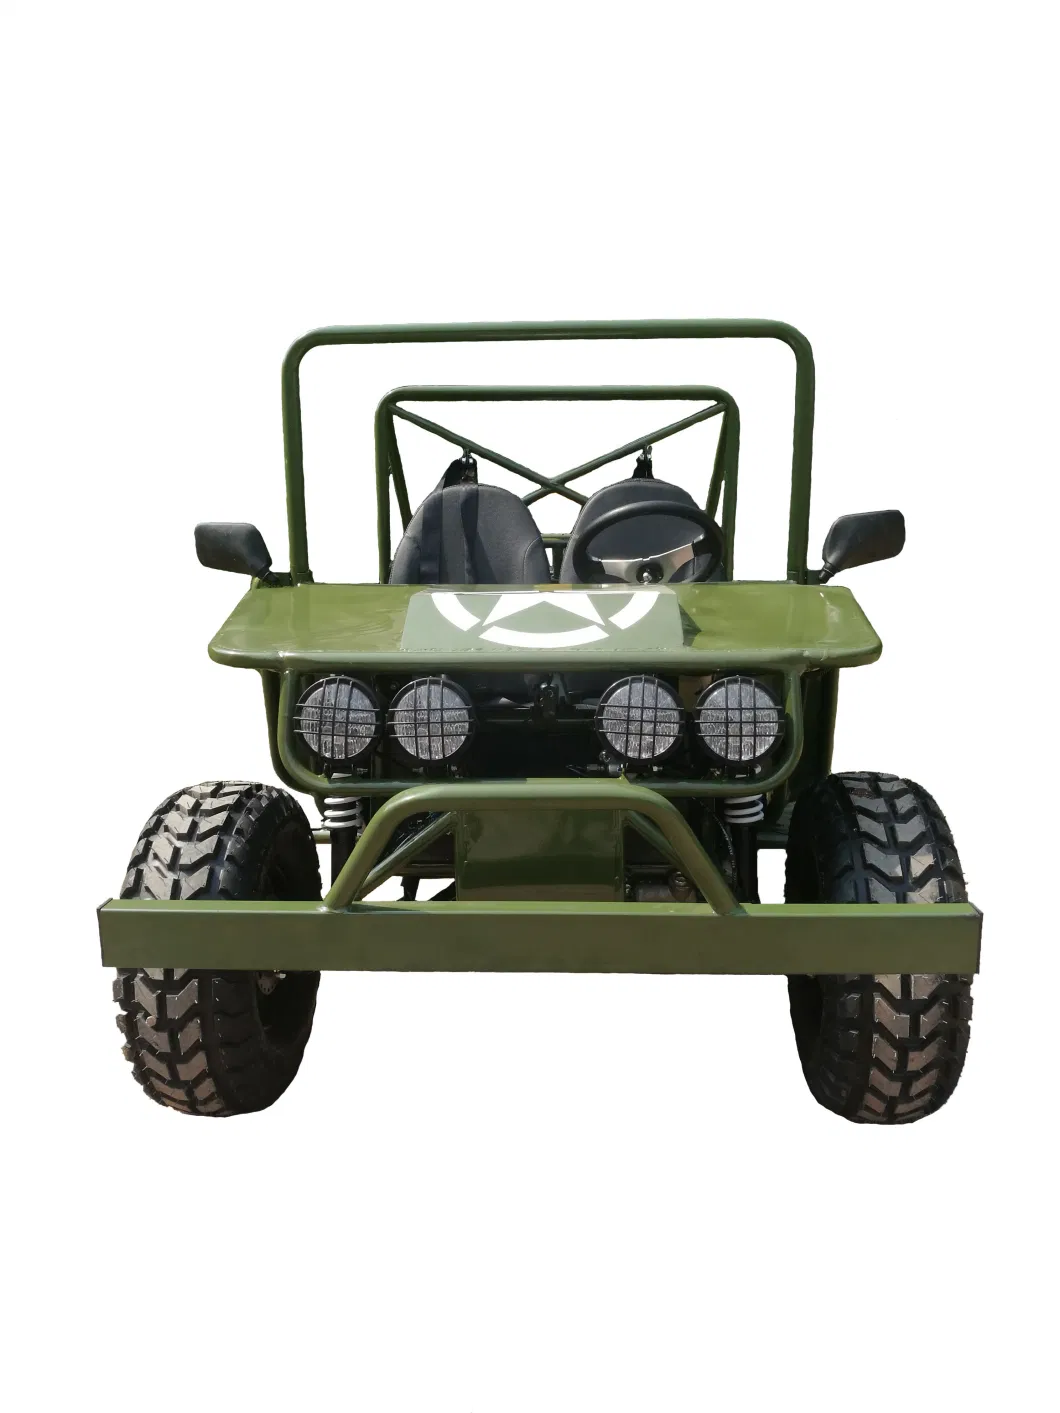 Power Flow Design Gasoline Mini Golf Buggy 200cc for Adults